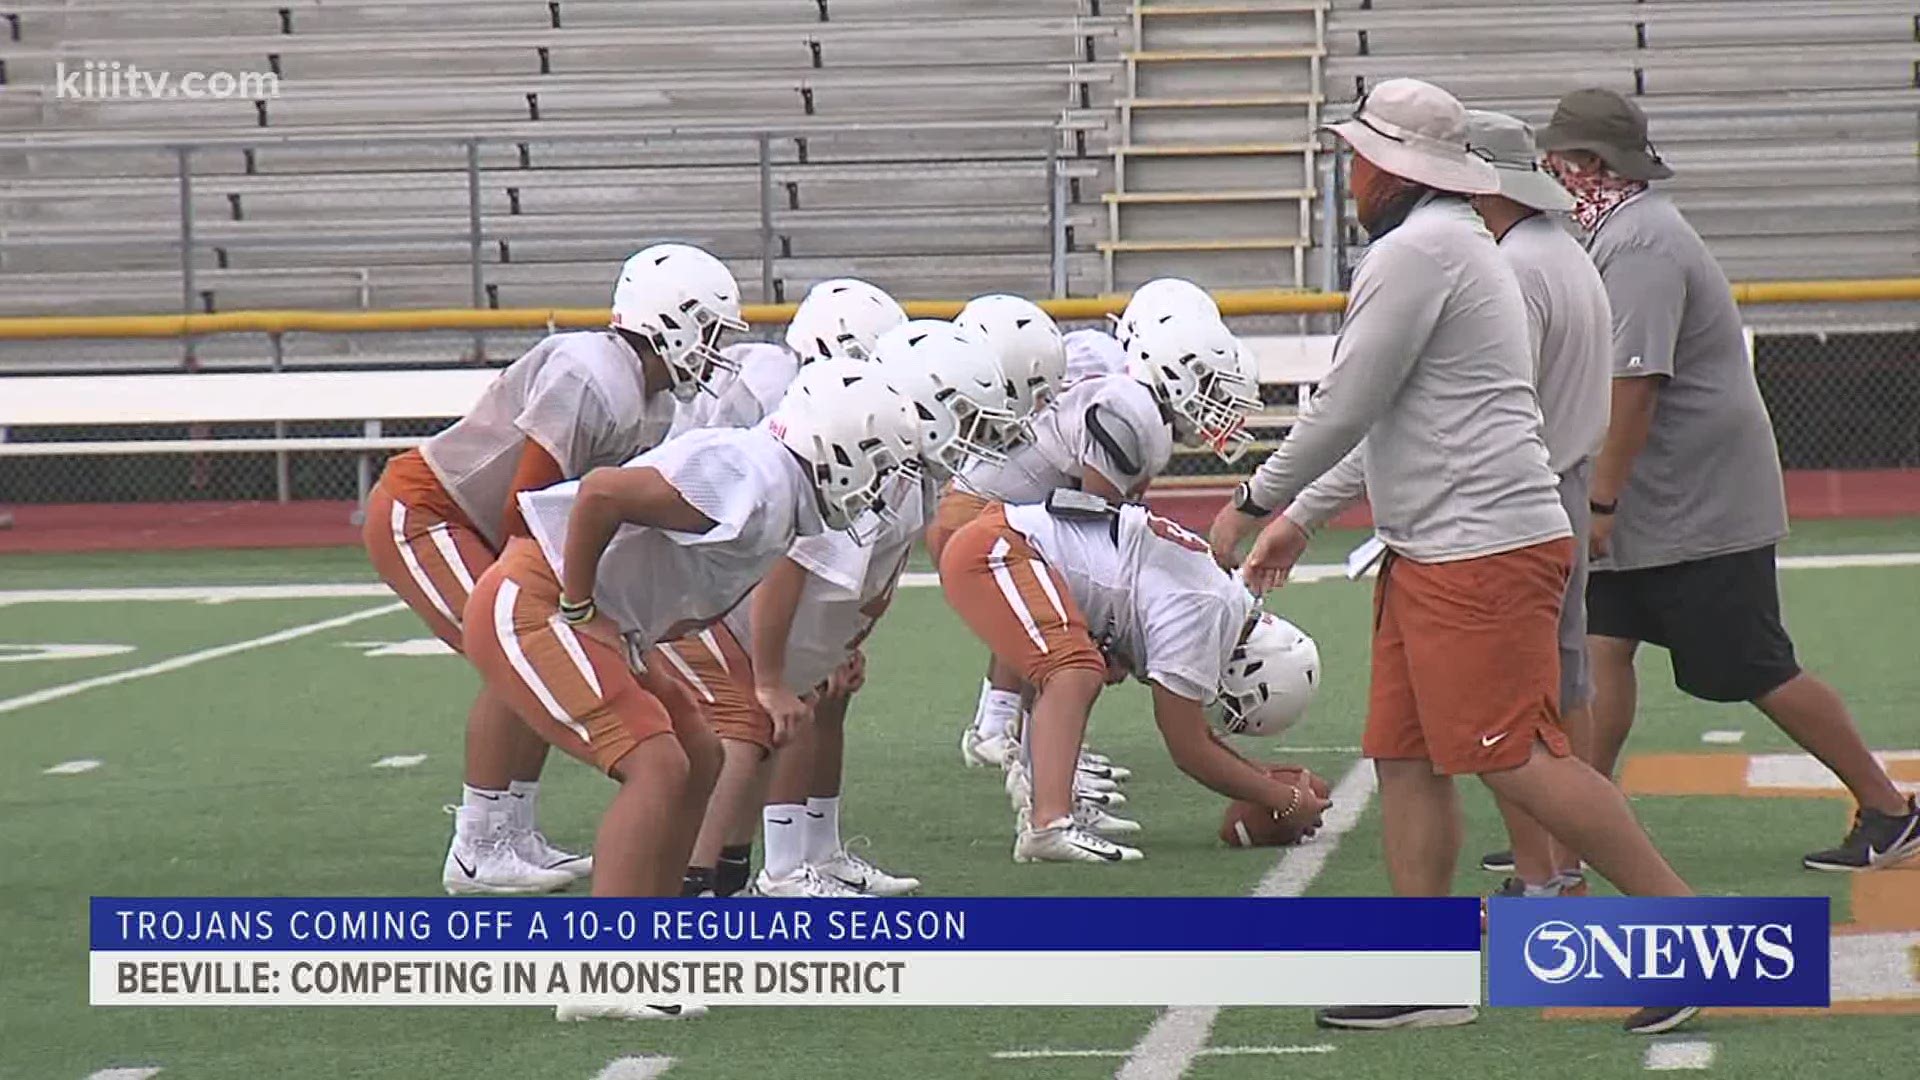 Beeville Trojans gearing up for tough district